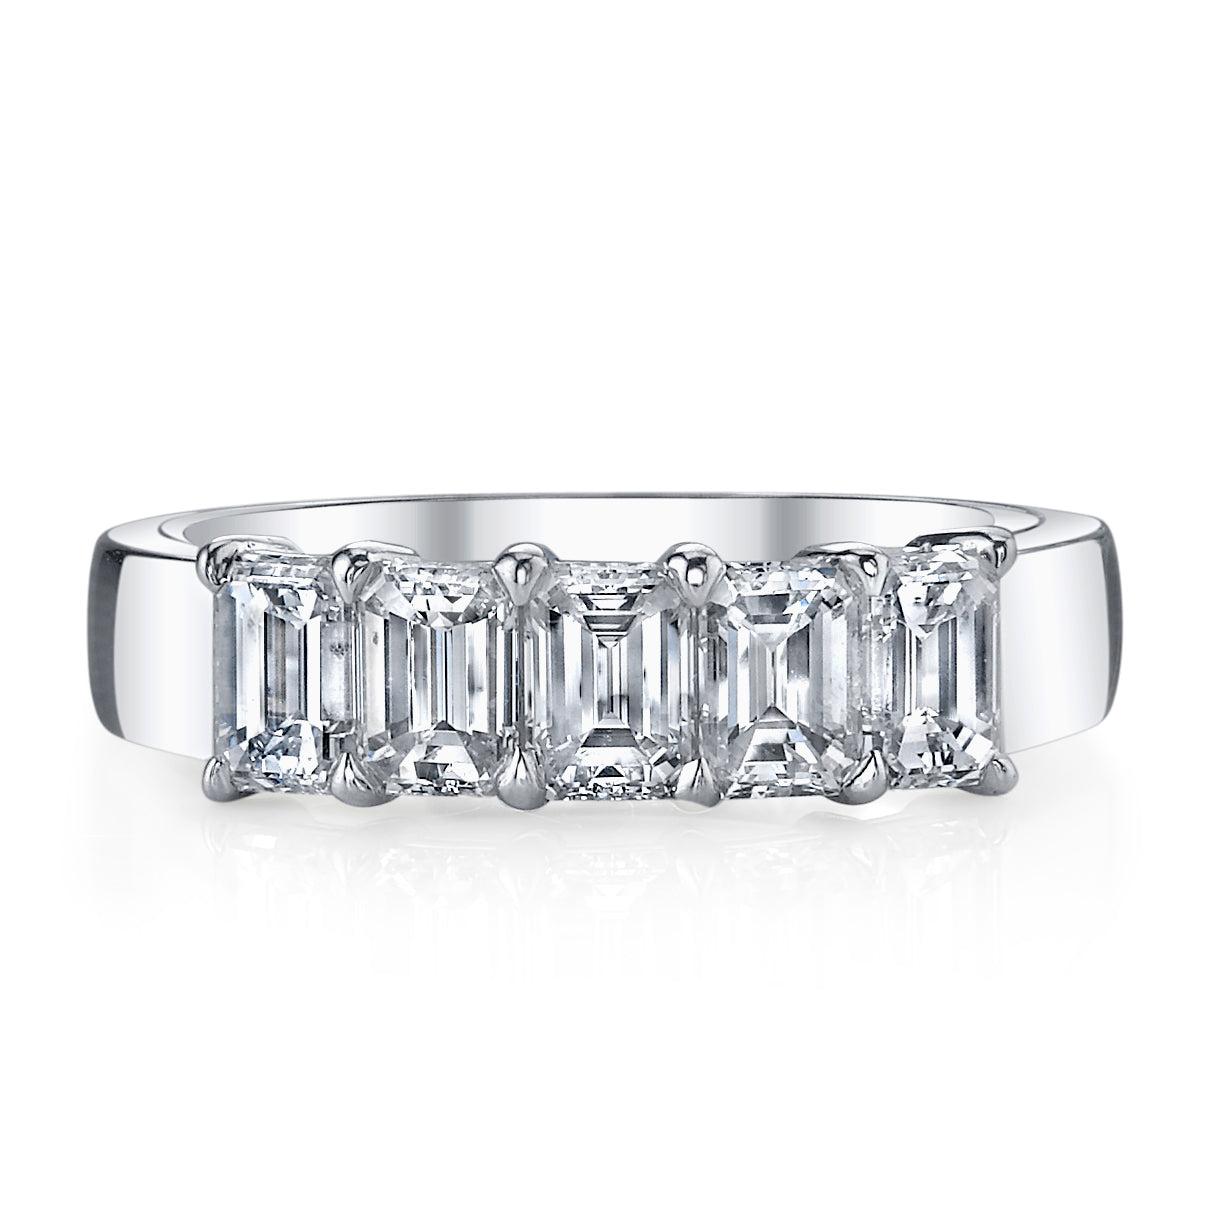 This stunning 2.11ct G/H VS Emerald Cut Diamond Band is set in sophisticated horizontally-set 5-stone Platinum. 
A true symbol of everlasting love, this exquisite ring is currently a size 6.
Emerald Cut Diamond Band.
Diamonds:  2.11ct G/H VS    
 
5